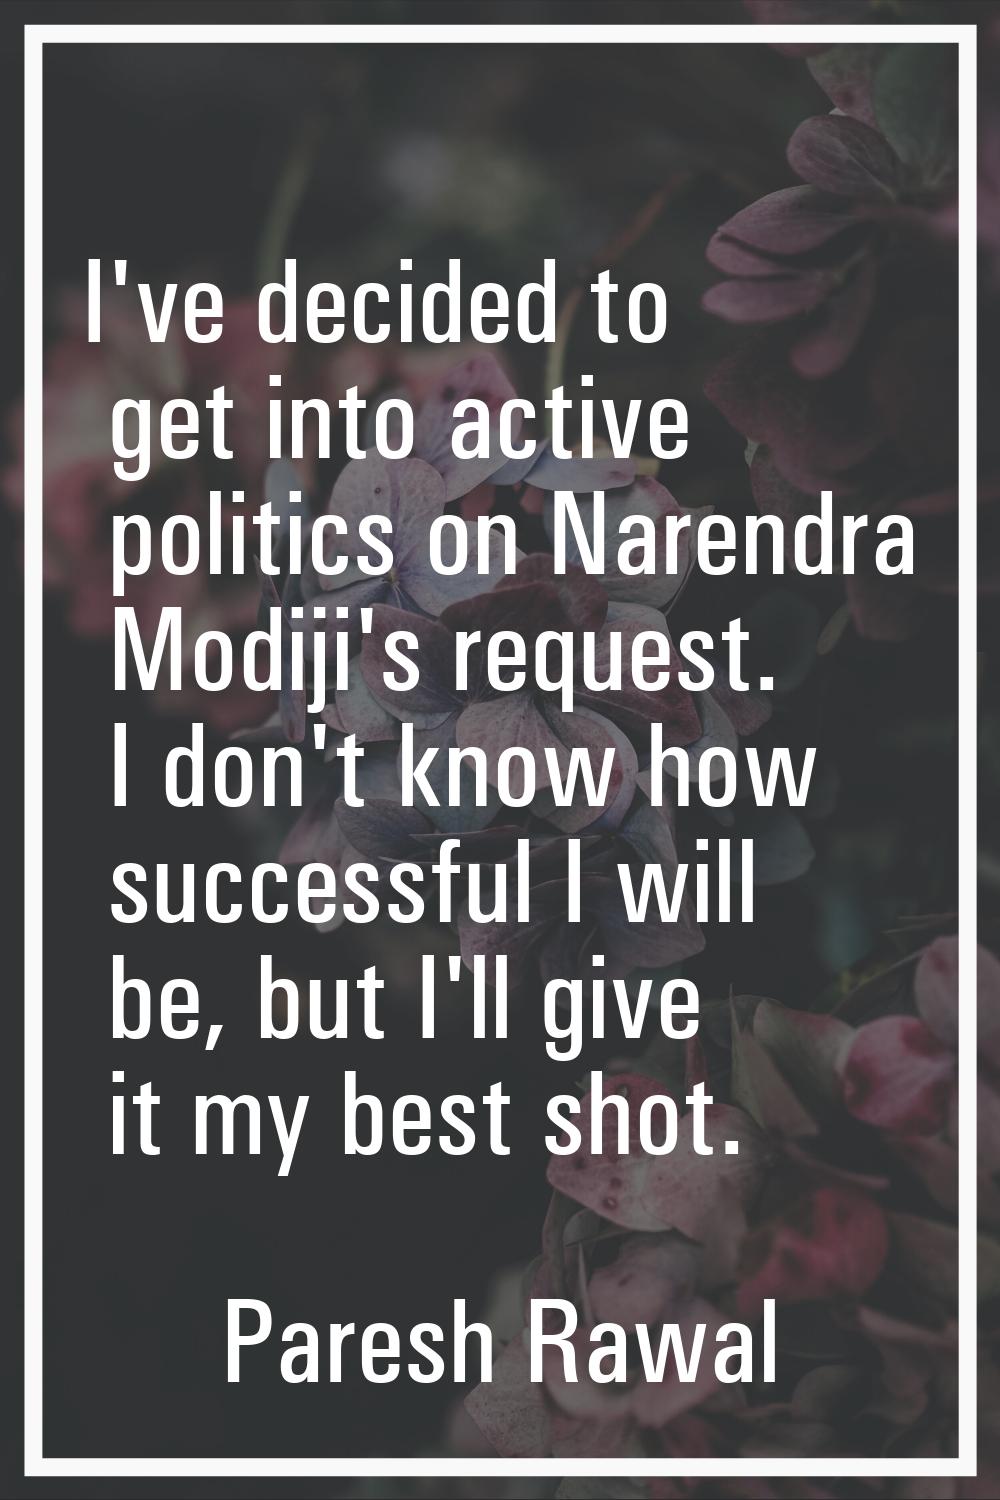 I've decided to get into active politics on Narendra Modiji's request. I don't know how successful 